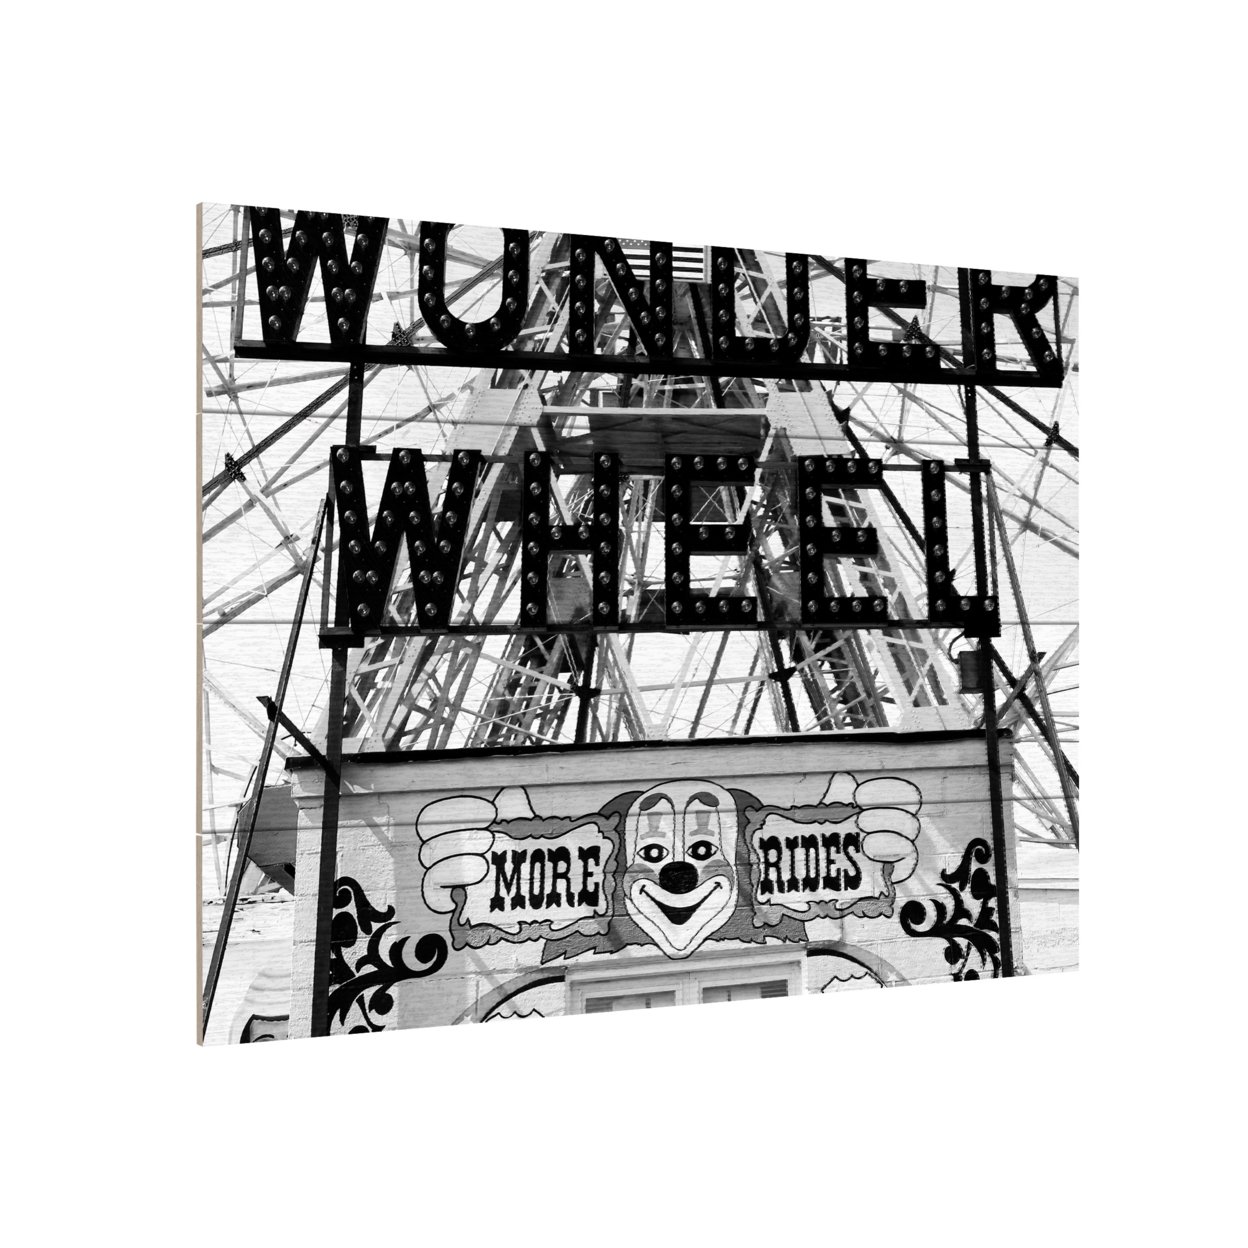 Wall Art 12 X 16 Inches Titled Coney Island Wonder Wheel This Way Ready To Hang Printed On Wooden Planks